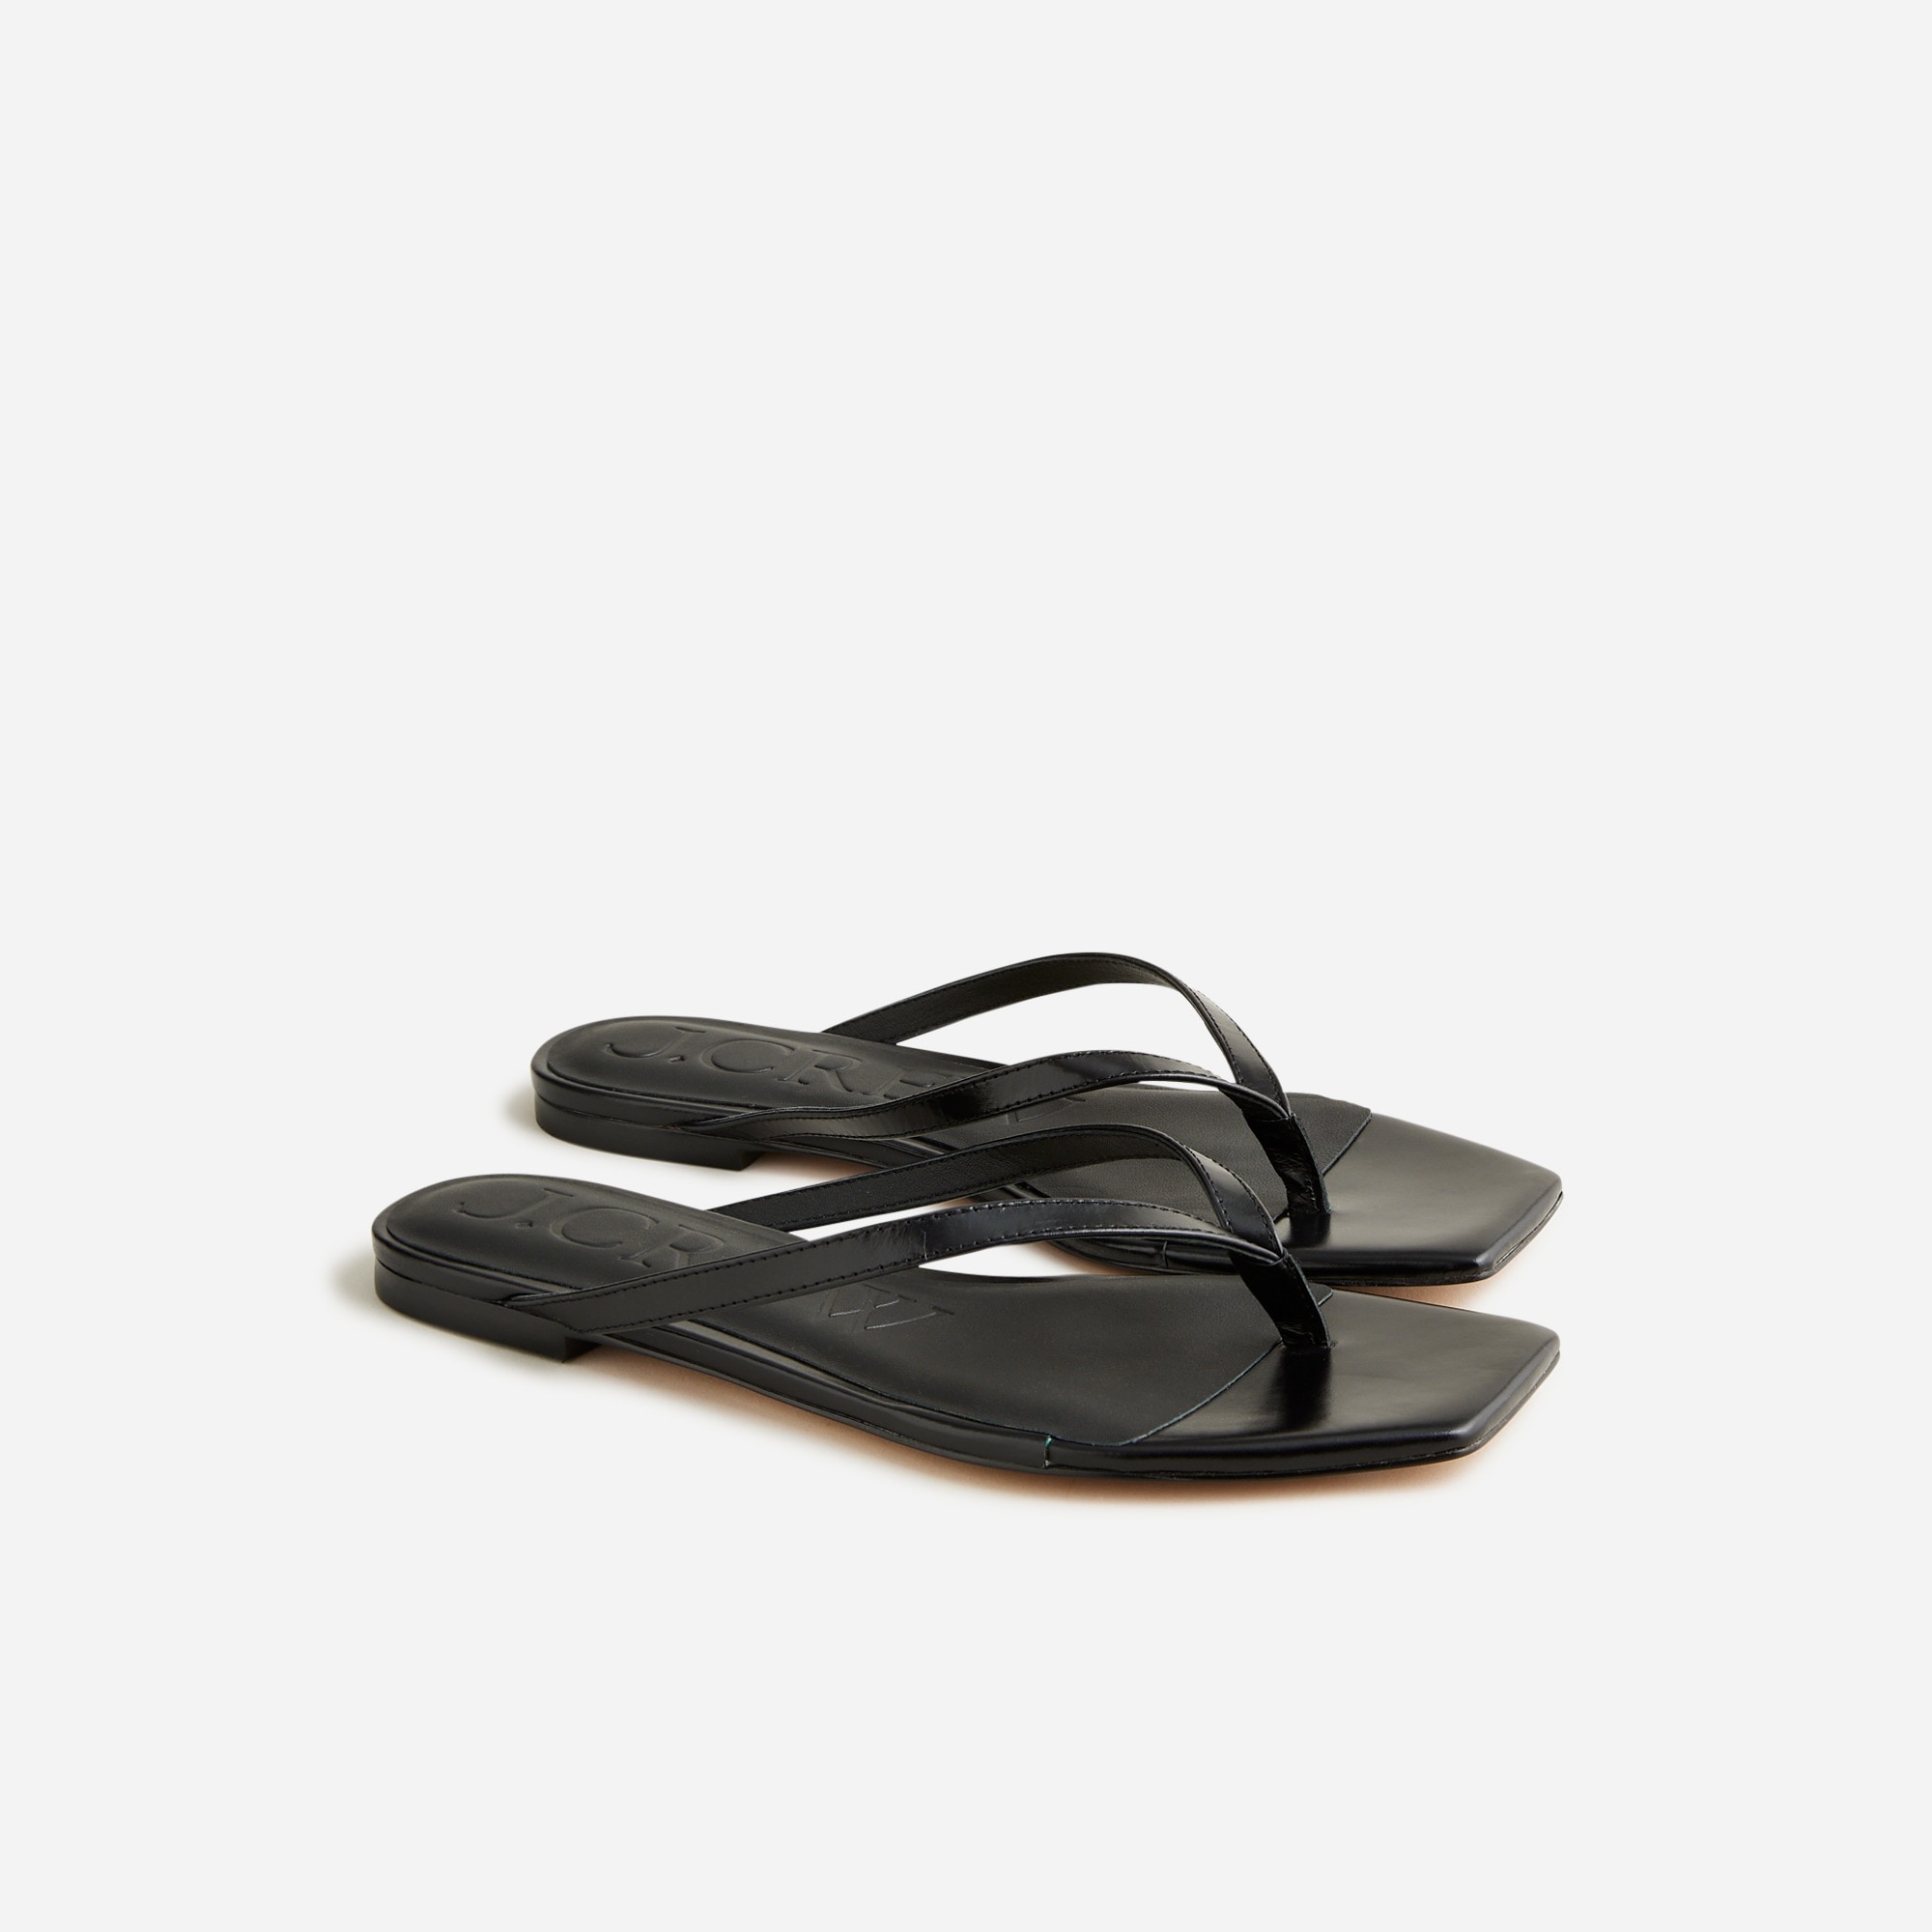  New Capri thong sandals in leather